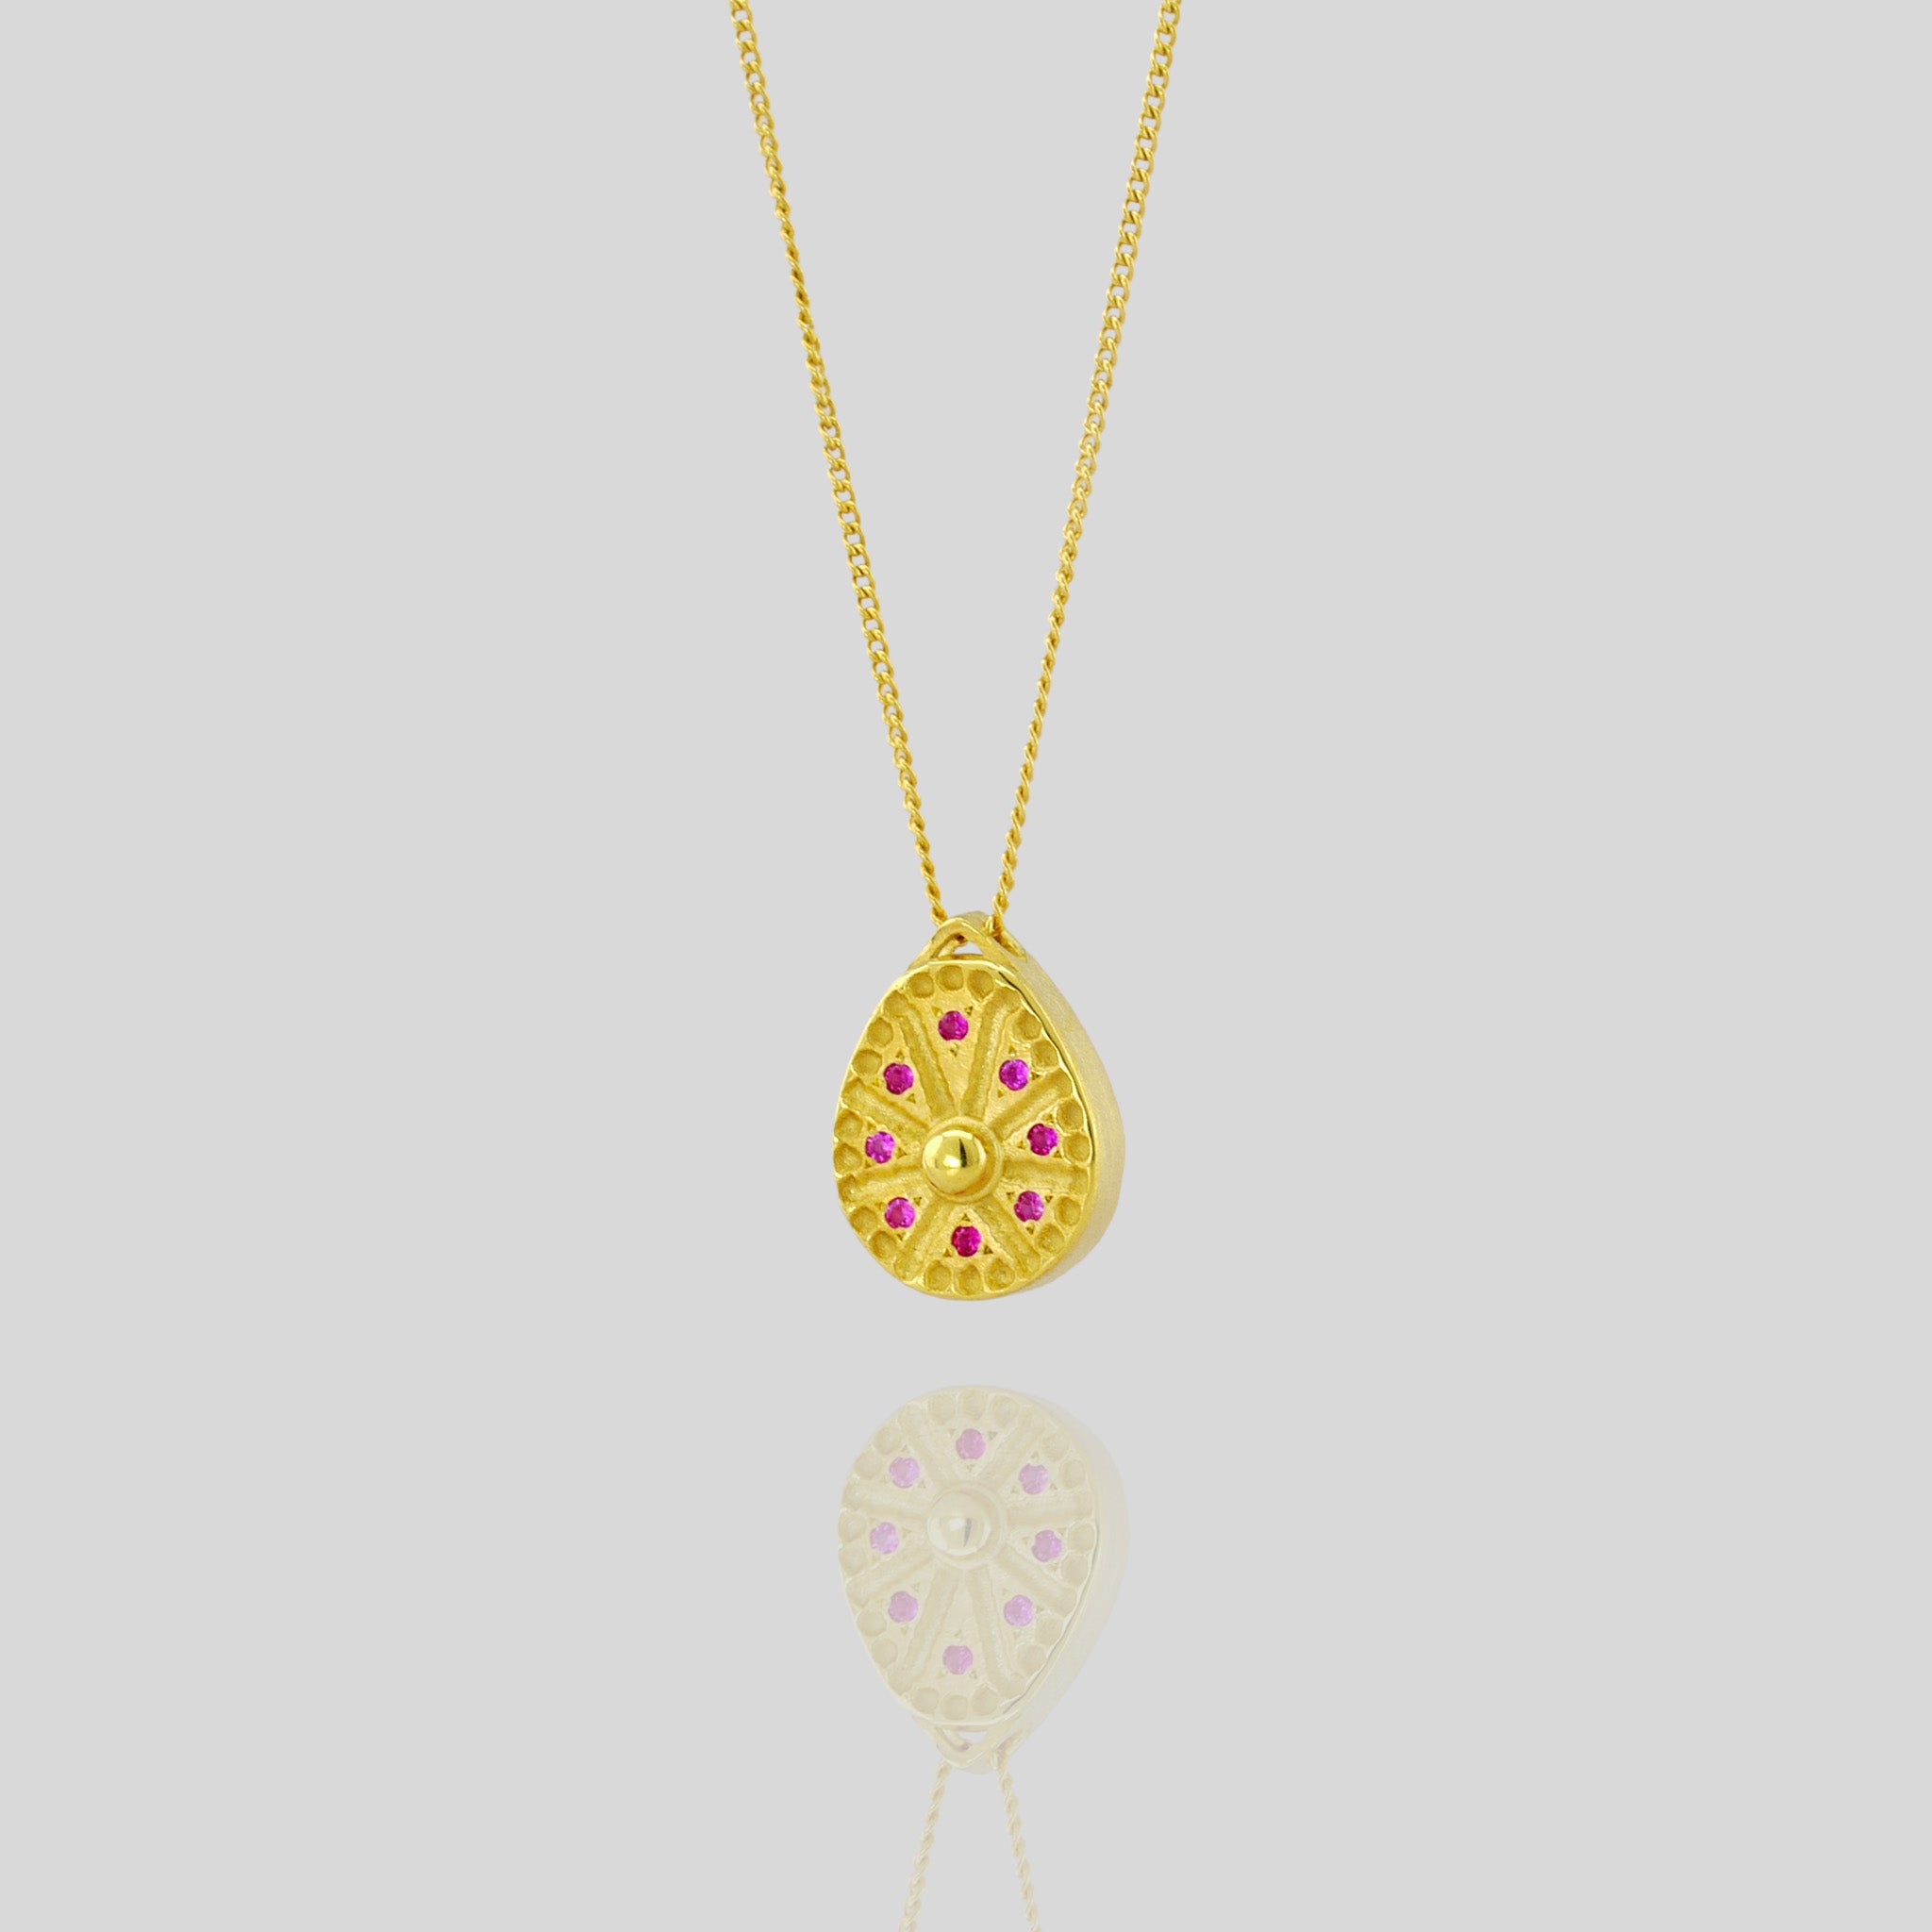 Close up of 18k Gold pendant resembling a Sundial clock, accented with small Rubies between the edges of each clock hand. A luxurious and timeless addition to any collection.